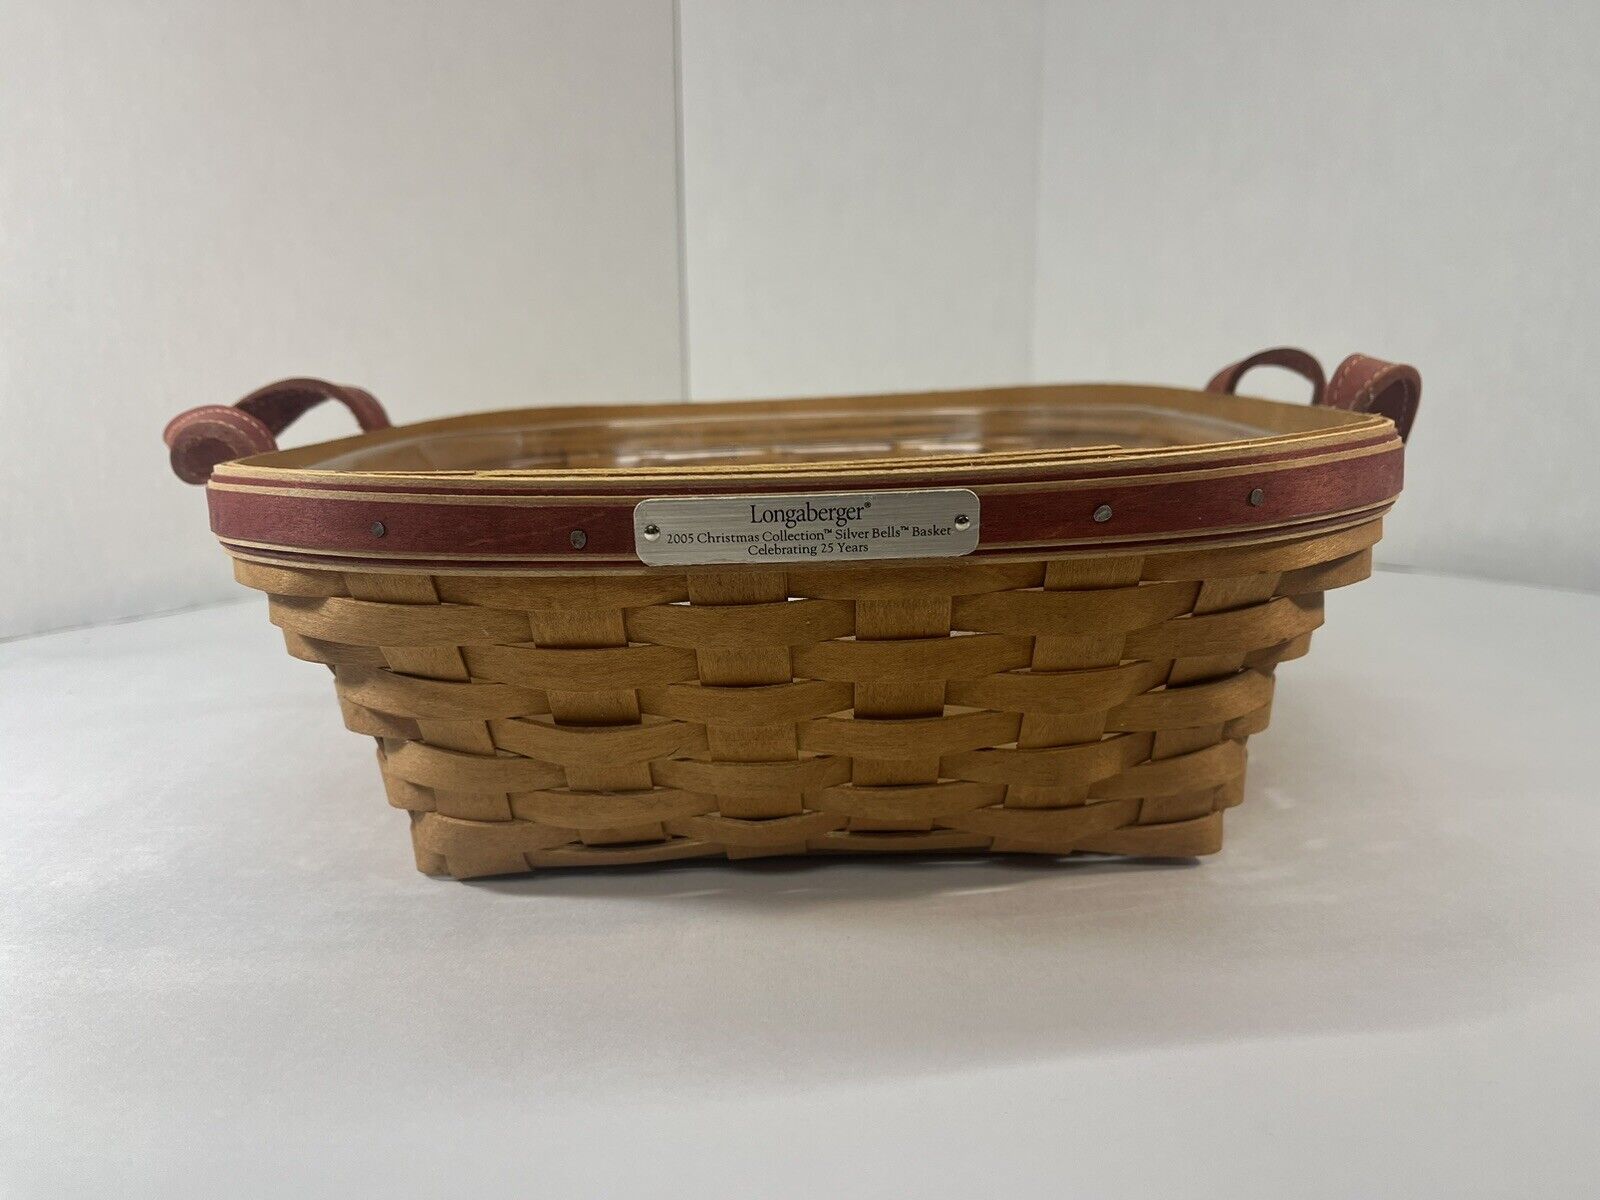 Longaberger 2005 Christmas Collection Silver Bells Basket 25 Years